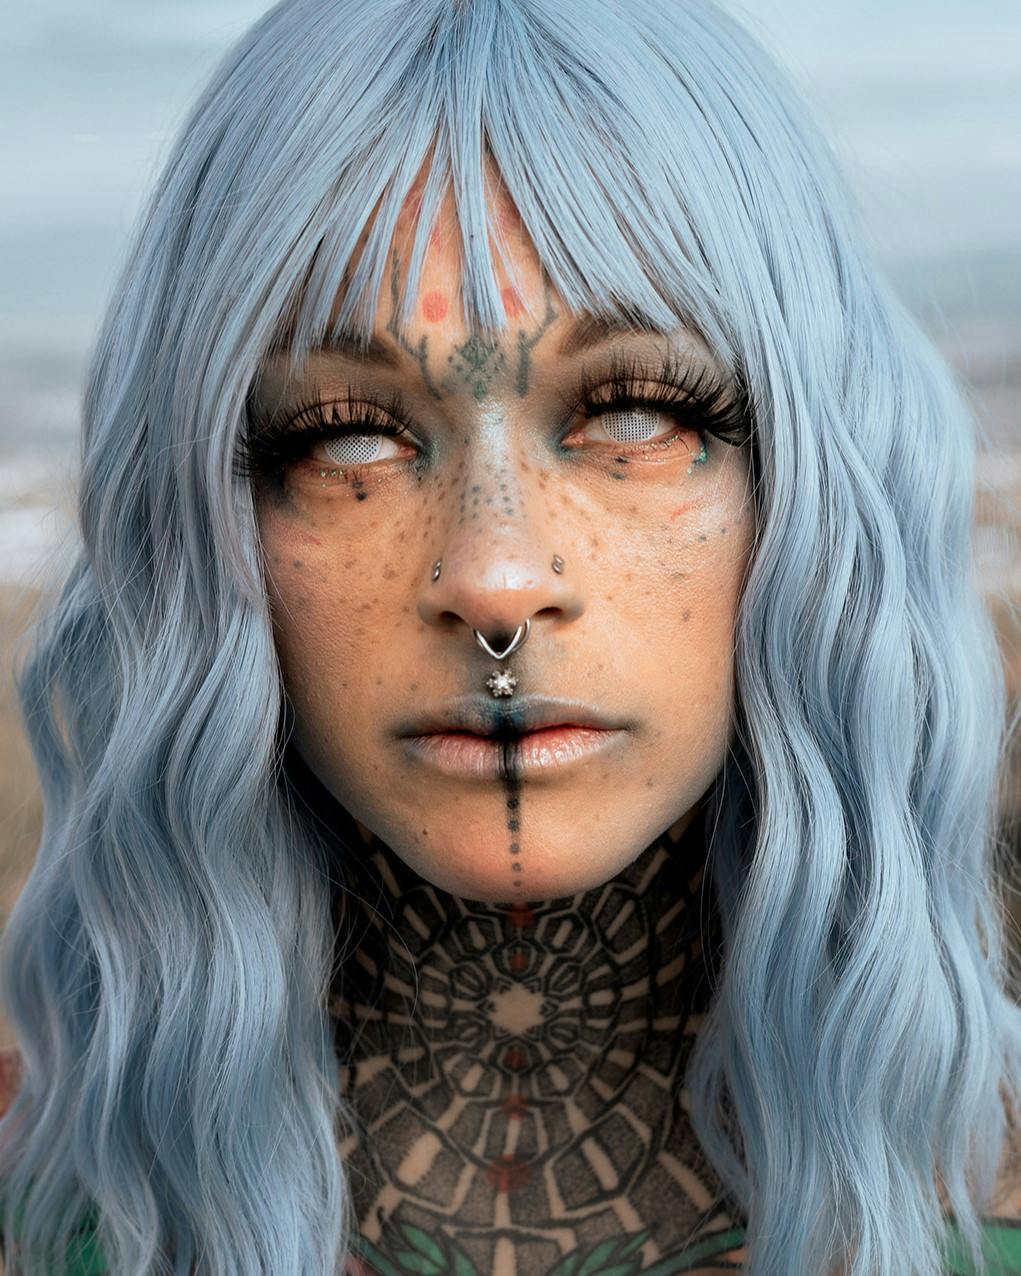 Woman with white hair and nose ring for headshot.